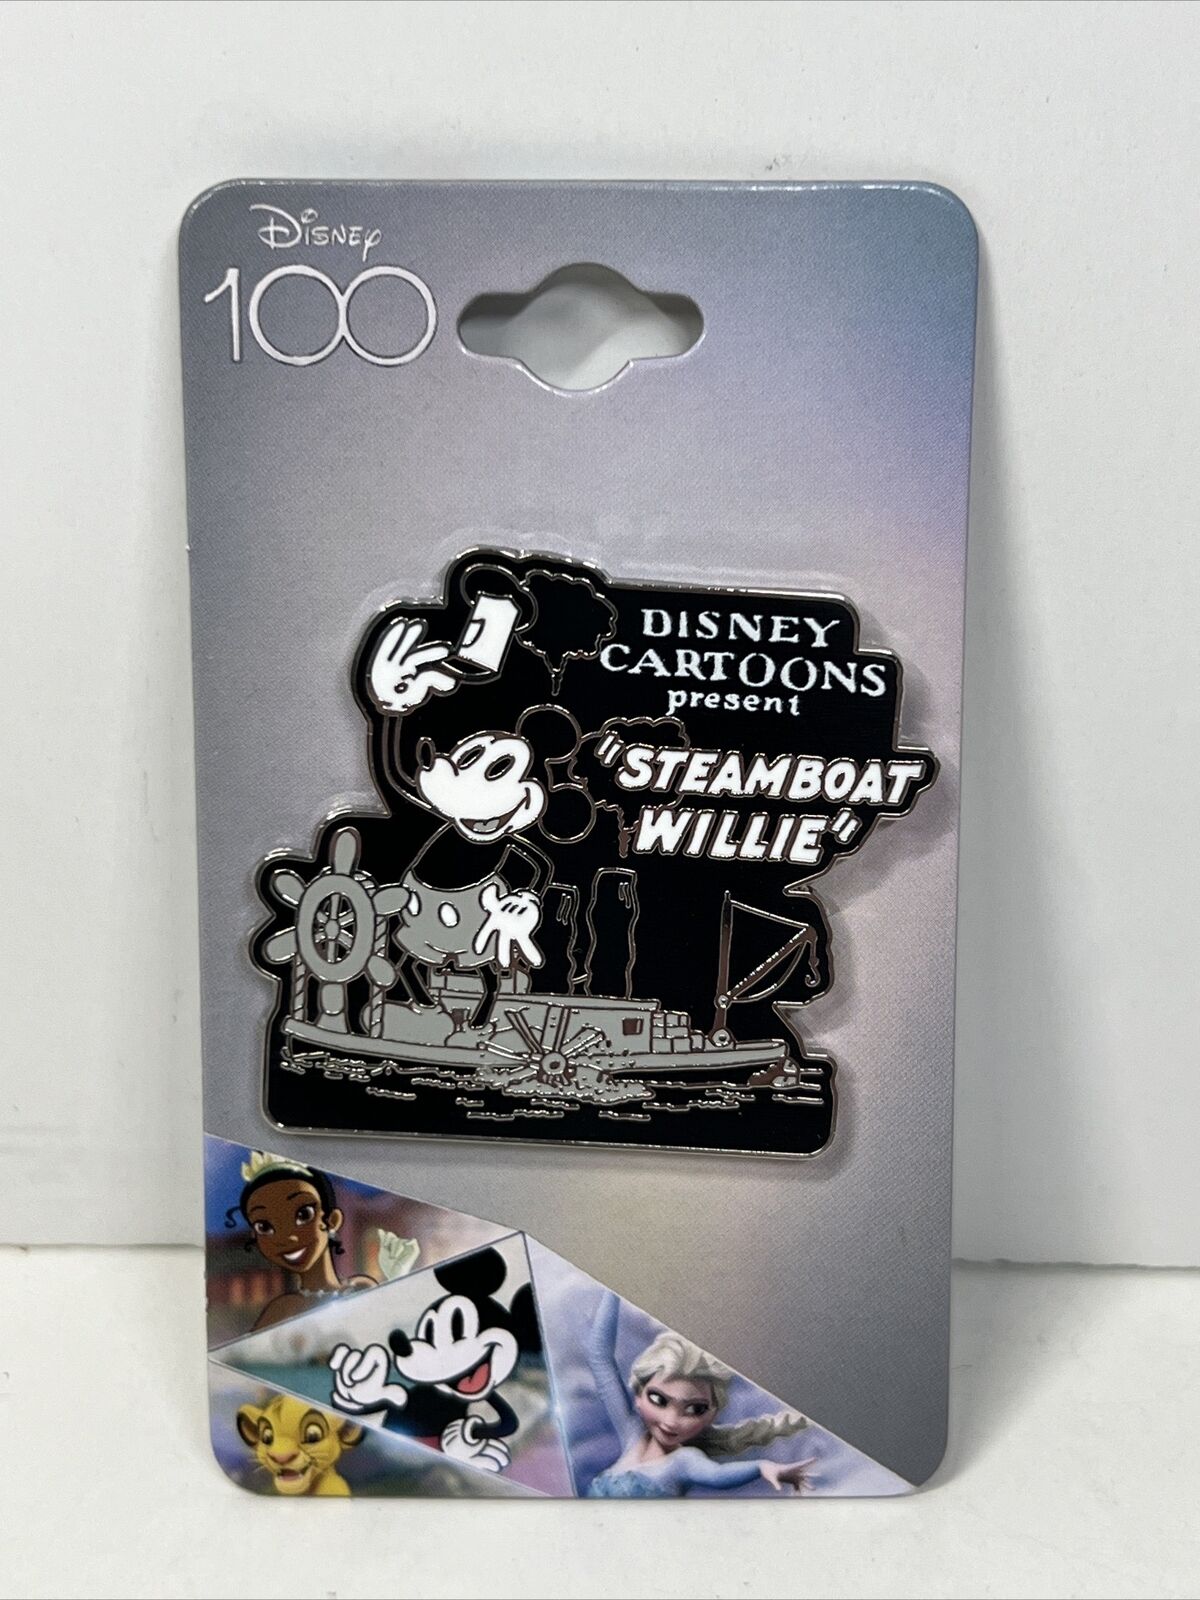 Disney 100 Mickey Mouse Steamboat Willie Cartoon Enamel Pin Box Lunch Excl New